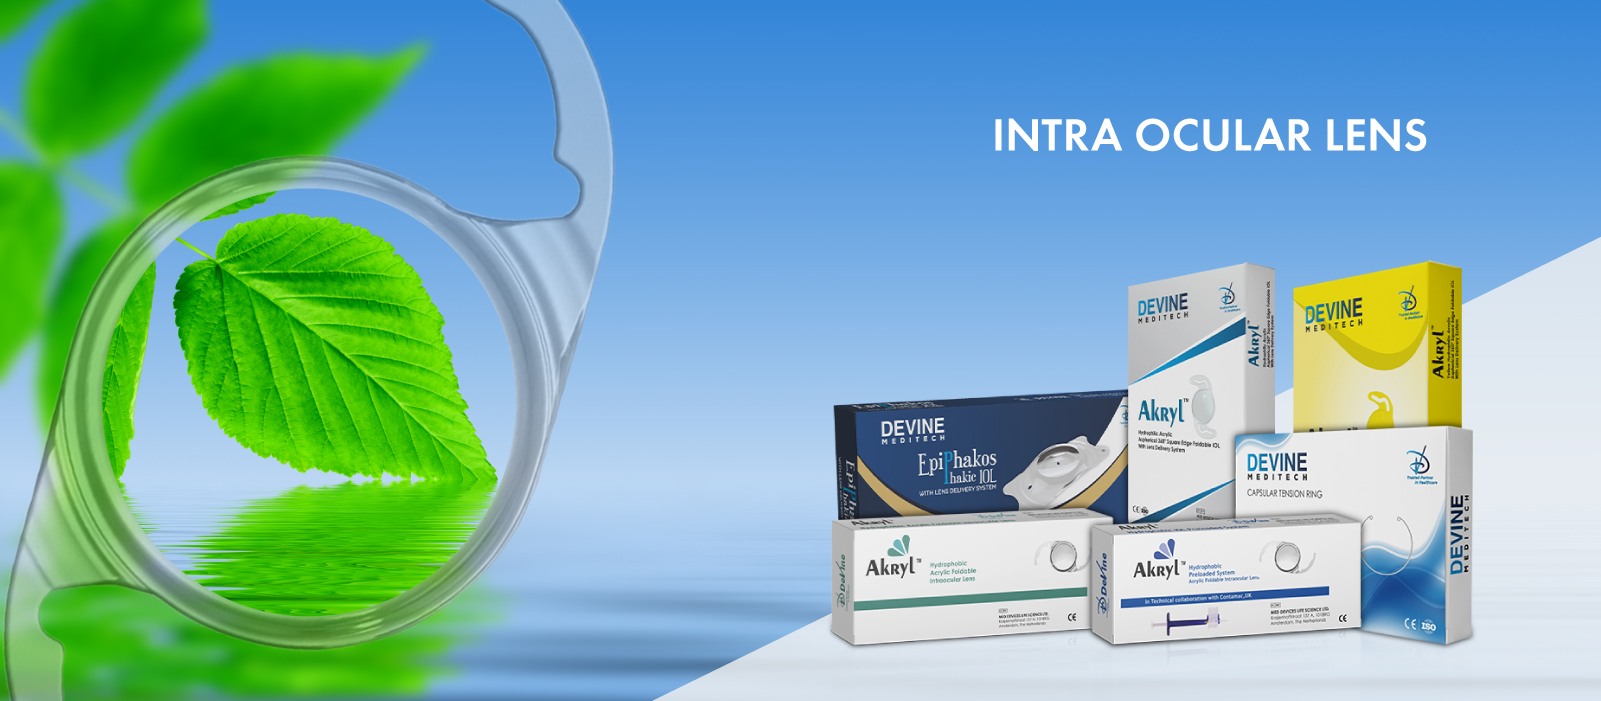 Intra Ocular Lens Suppilers in India